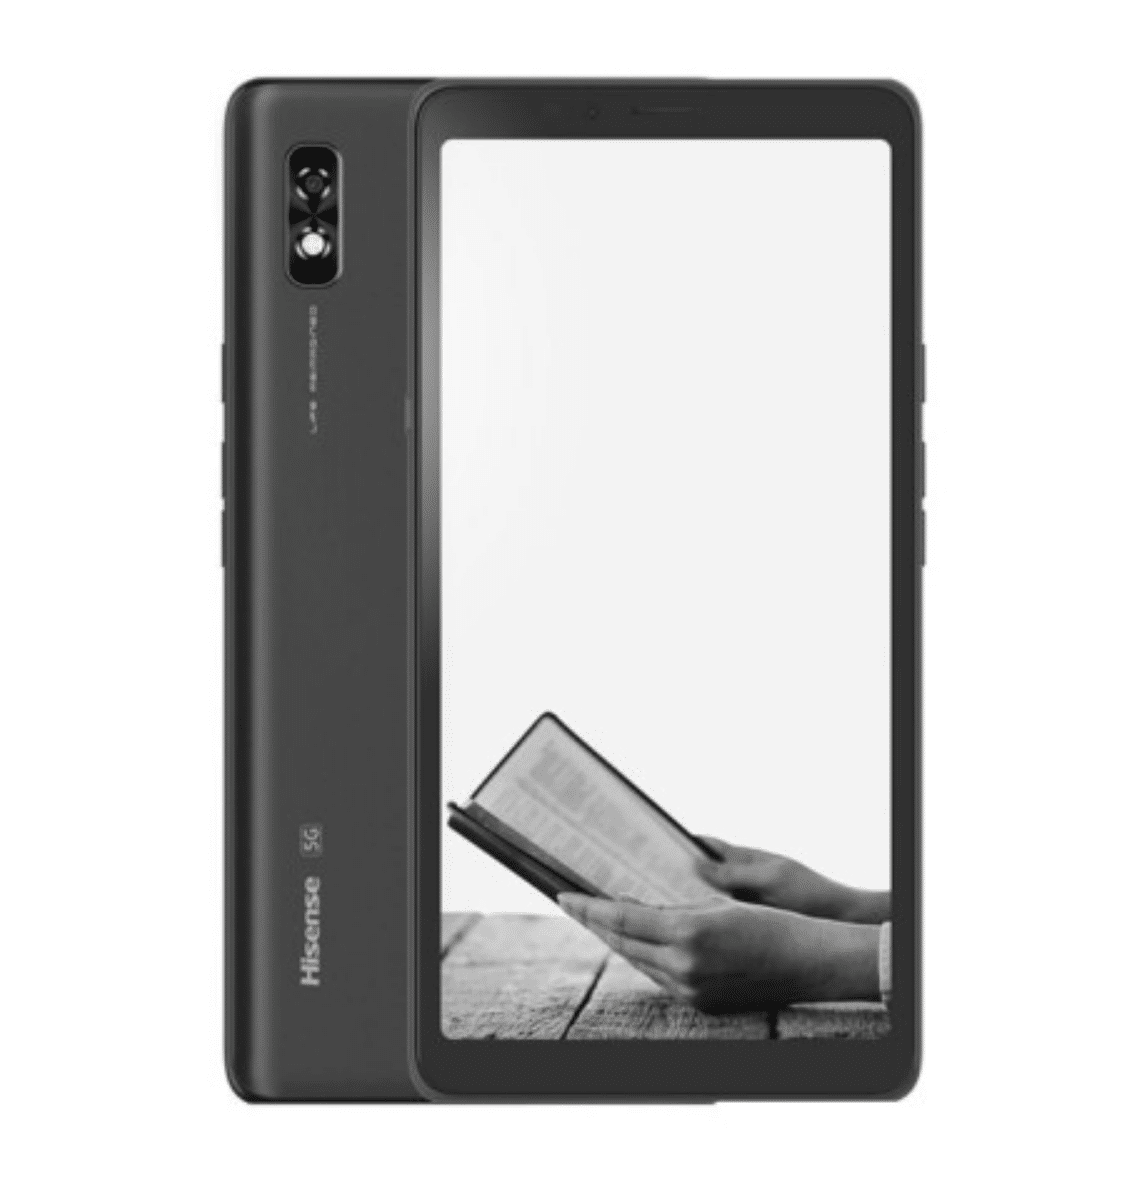 Hisense A7 5G Smartphone with E INK - 0